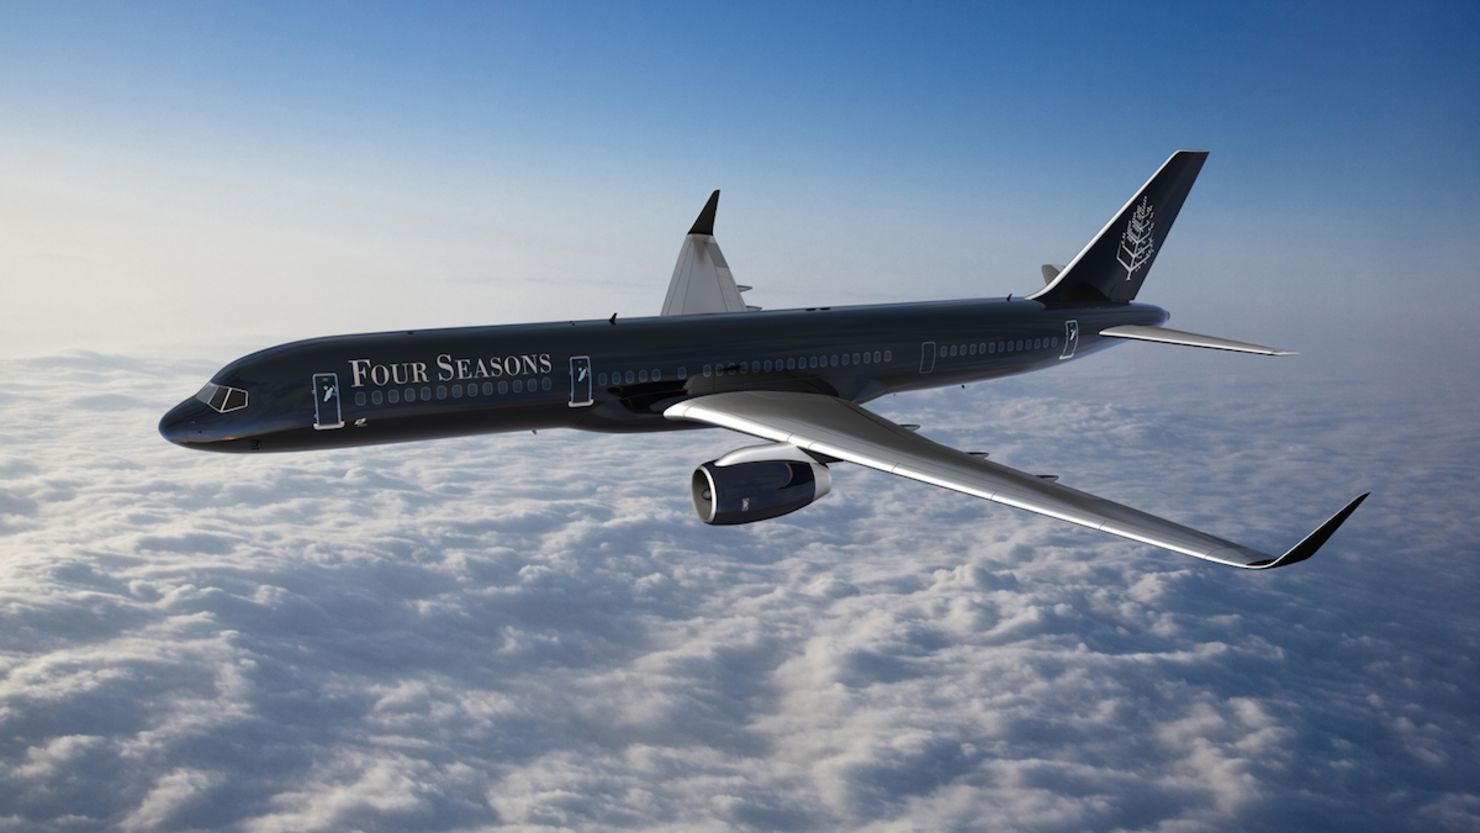 The Four Seasons' new jet, which takes flight in February 2015, is a Boeing 757. The luxury hotel brand says it will be fitted out with 52 seats in a 2-2 configuration. 